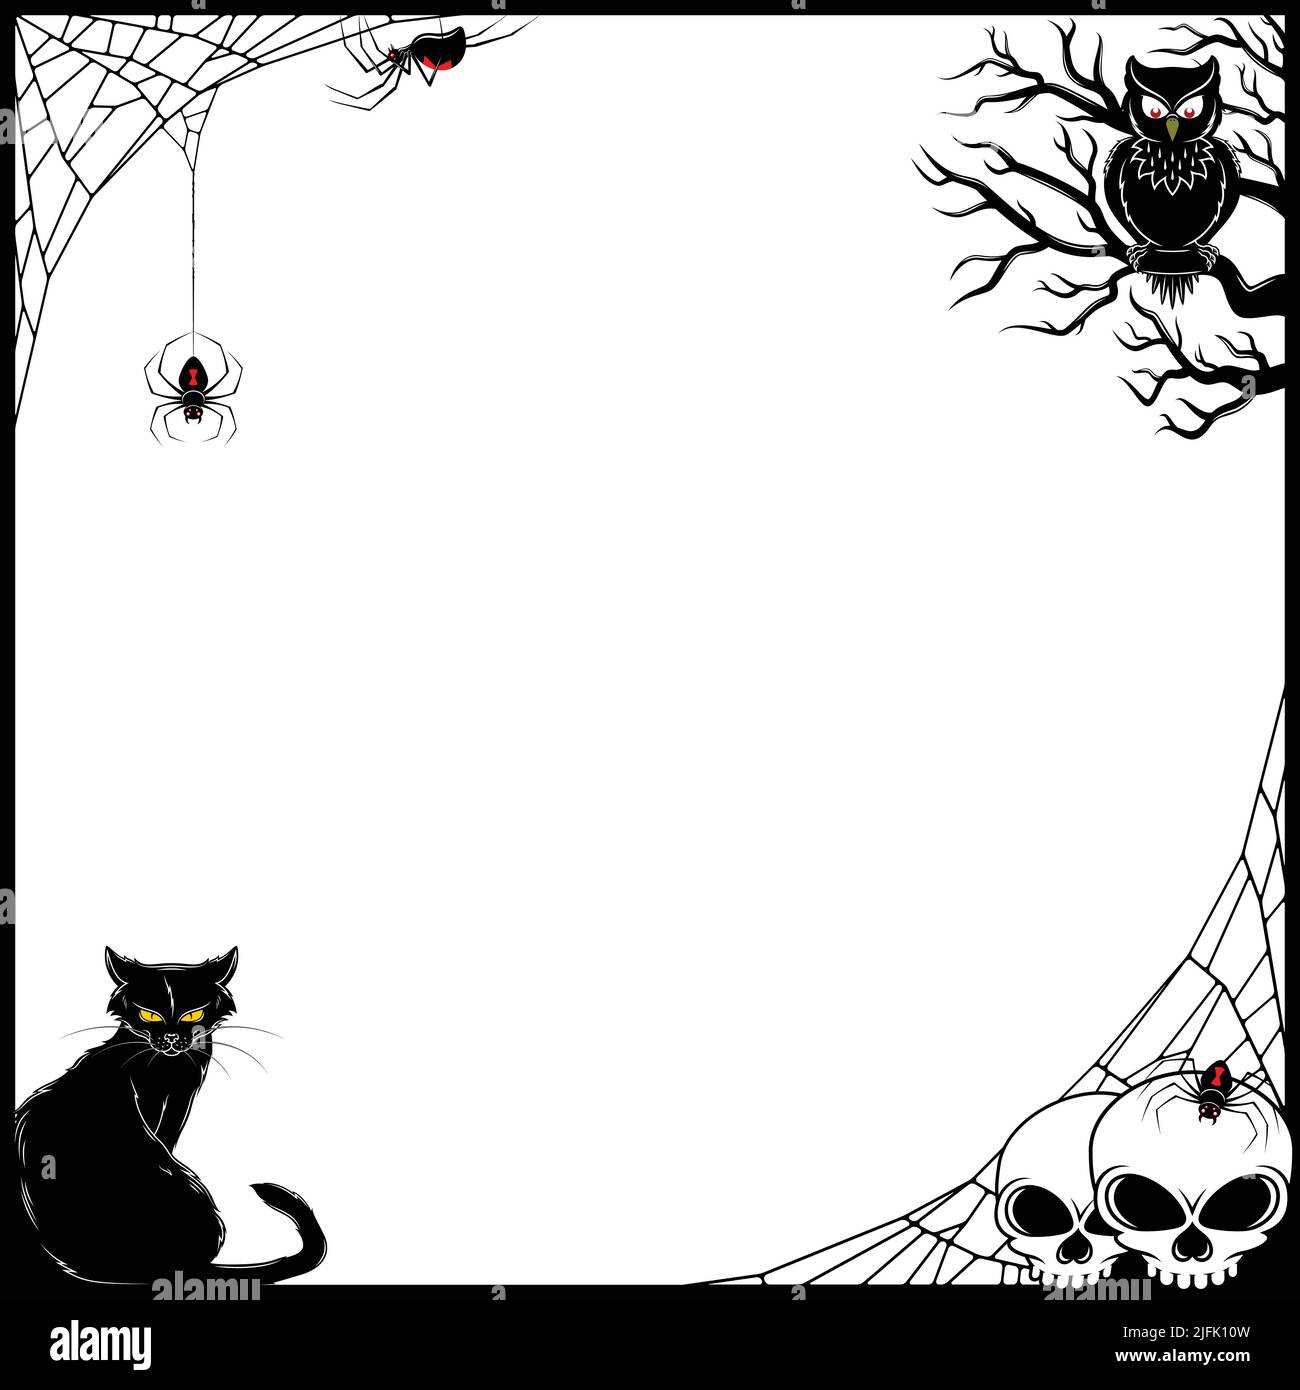 Frame vector design for with characteristic elements of Halloween with bats, spiders and skulls Stock Vector